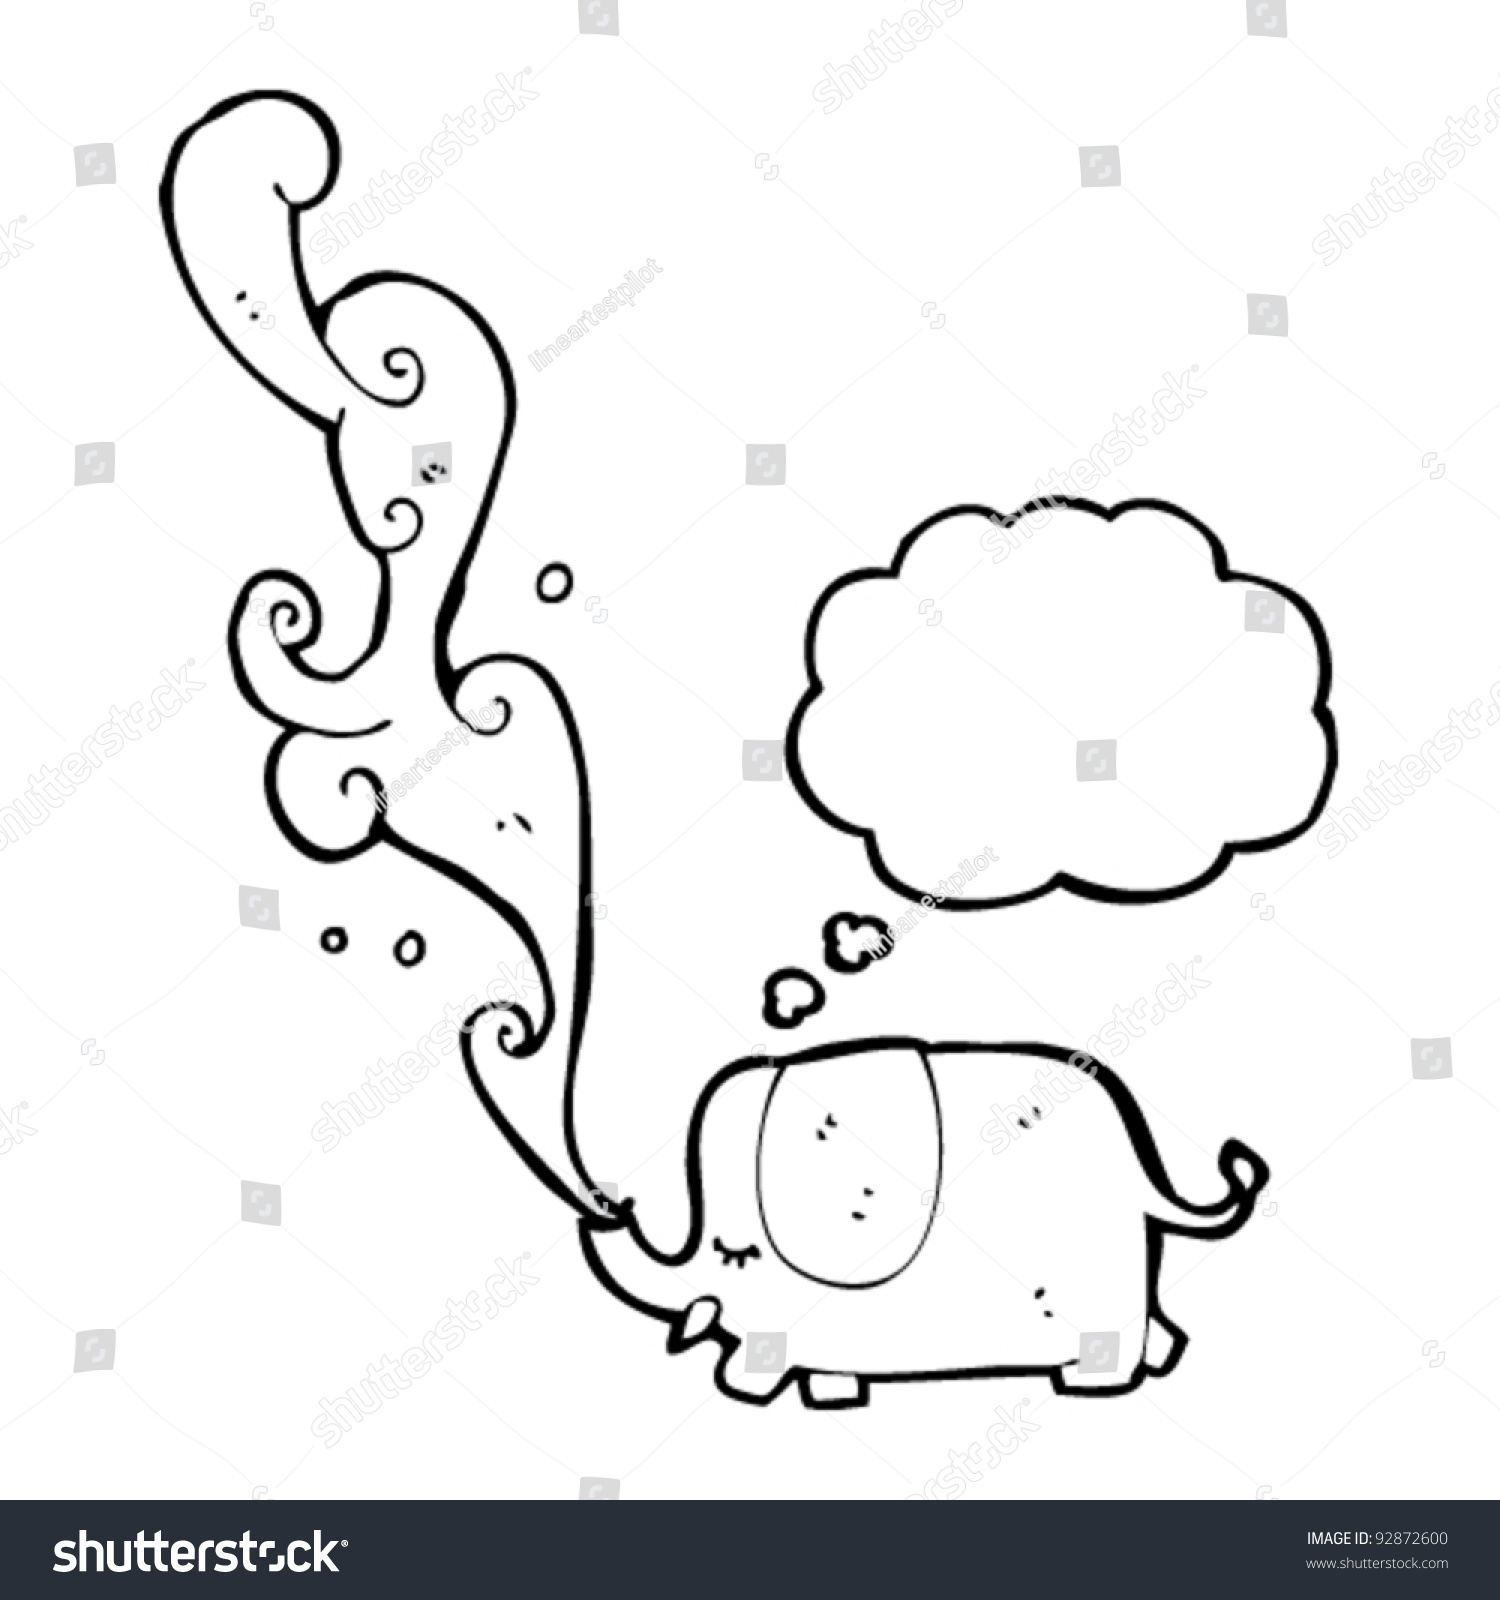 Elephant Squirting Water Cartoon Stock Vector Royalty Free Shutterstock